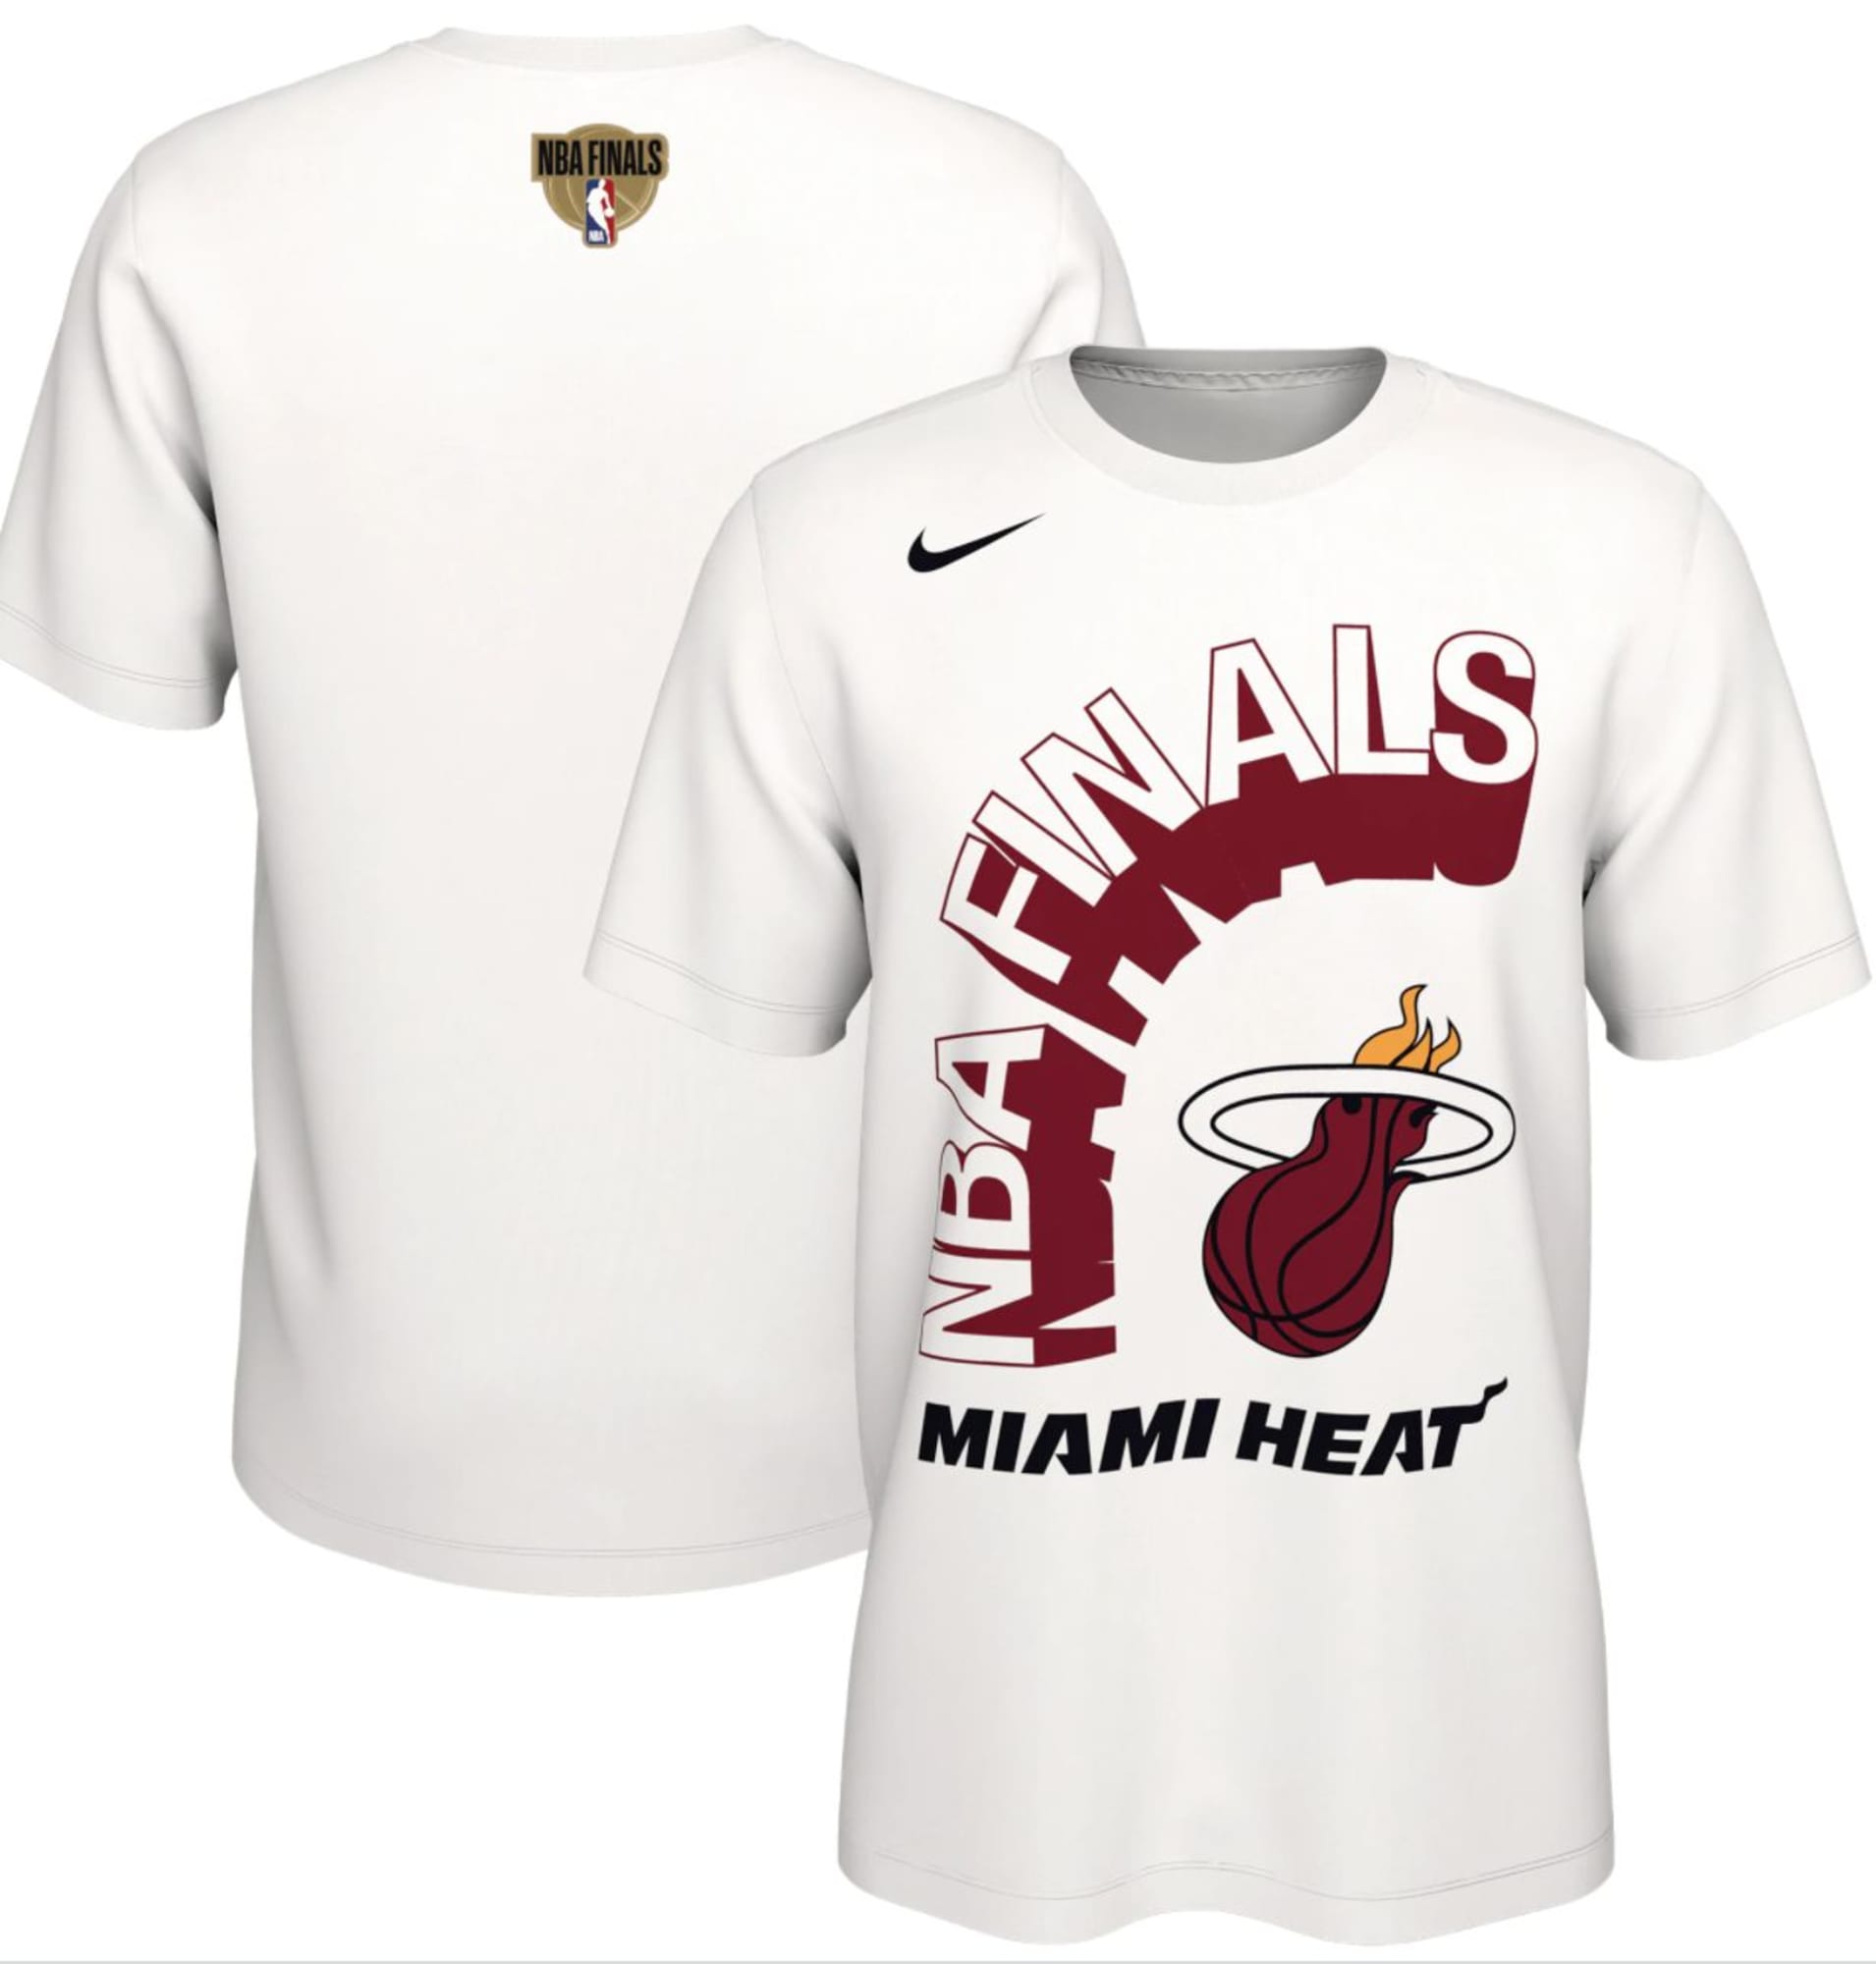 The Miami Heat are back in the NBA Finals. Time to gear up.